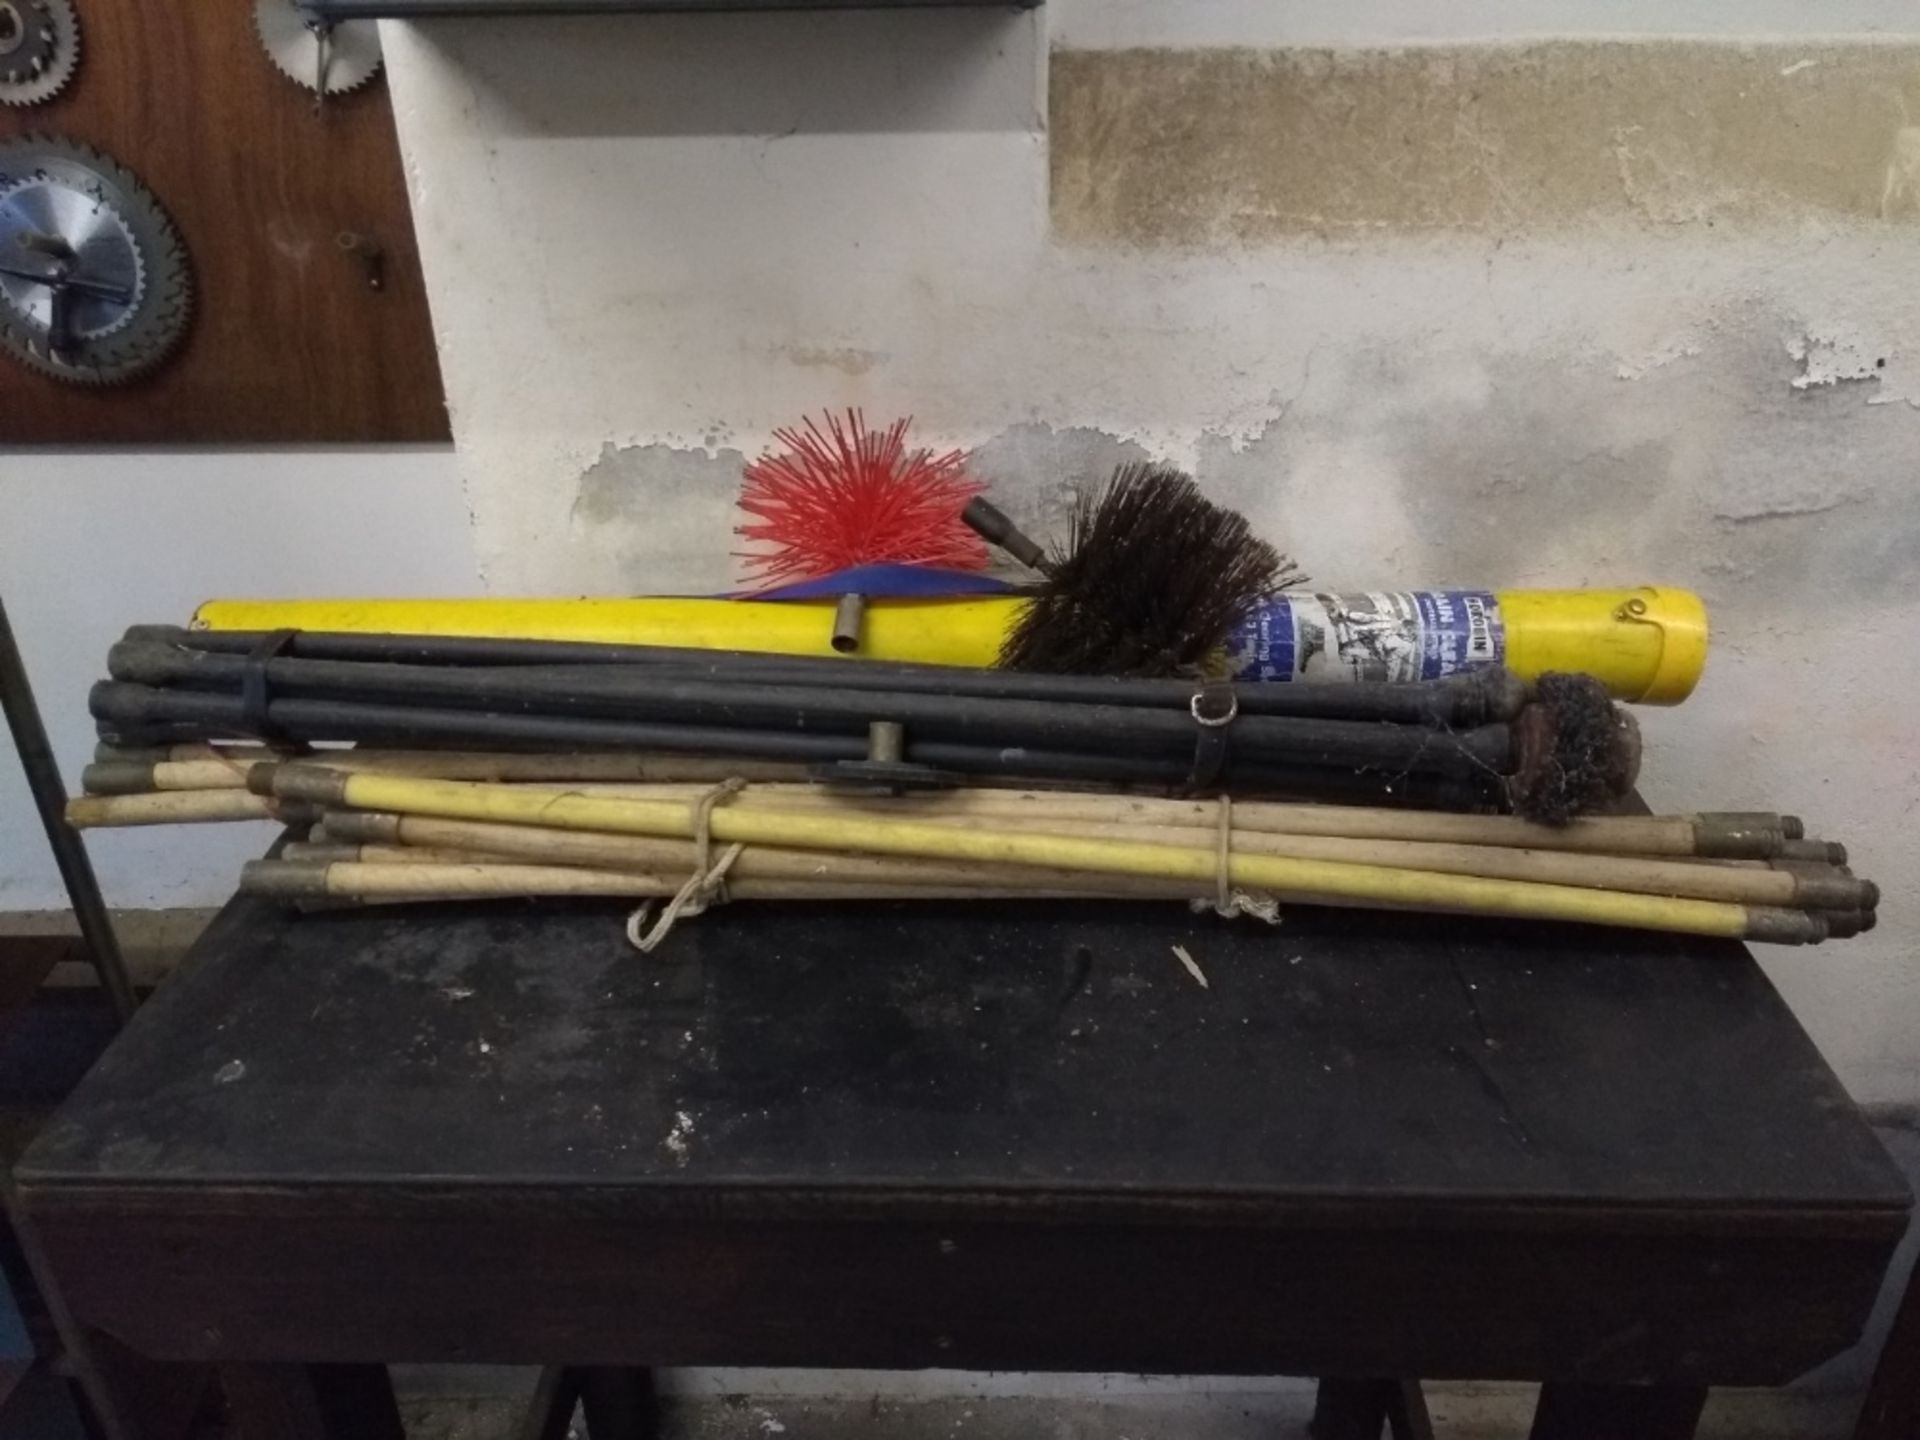 Draining rods and brushes